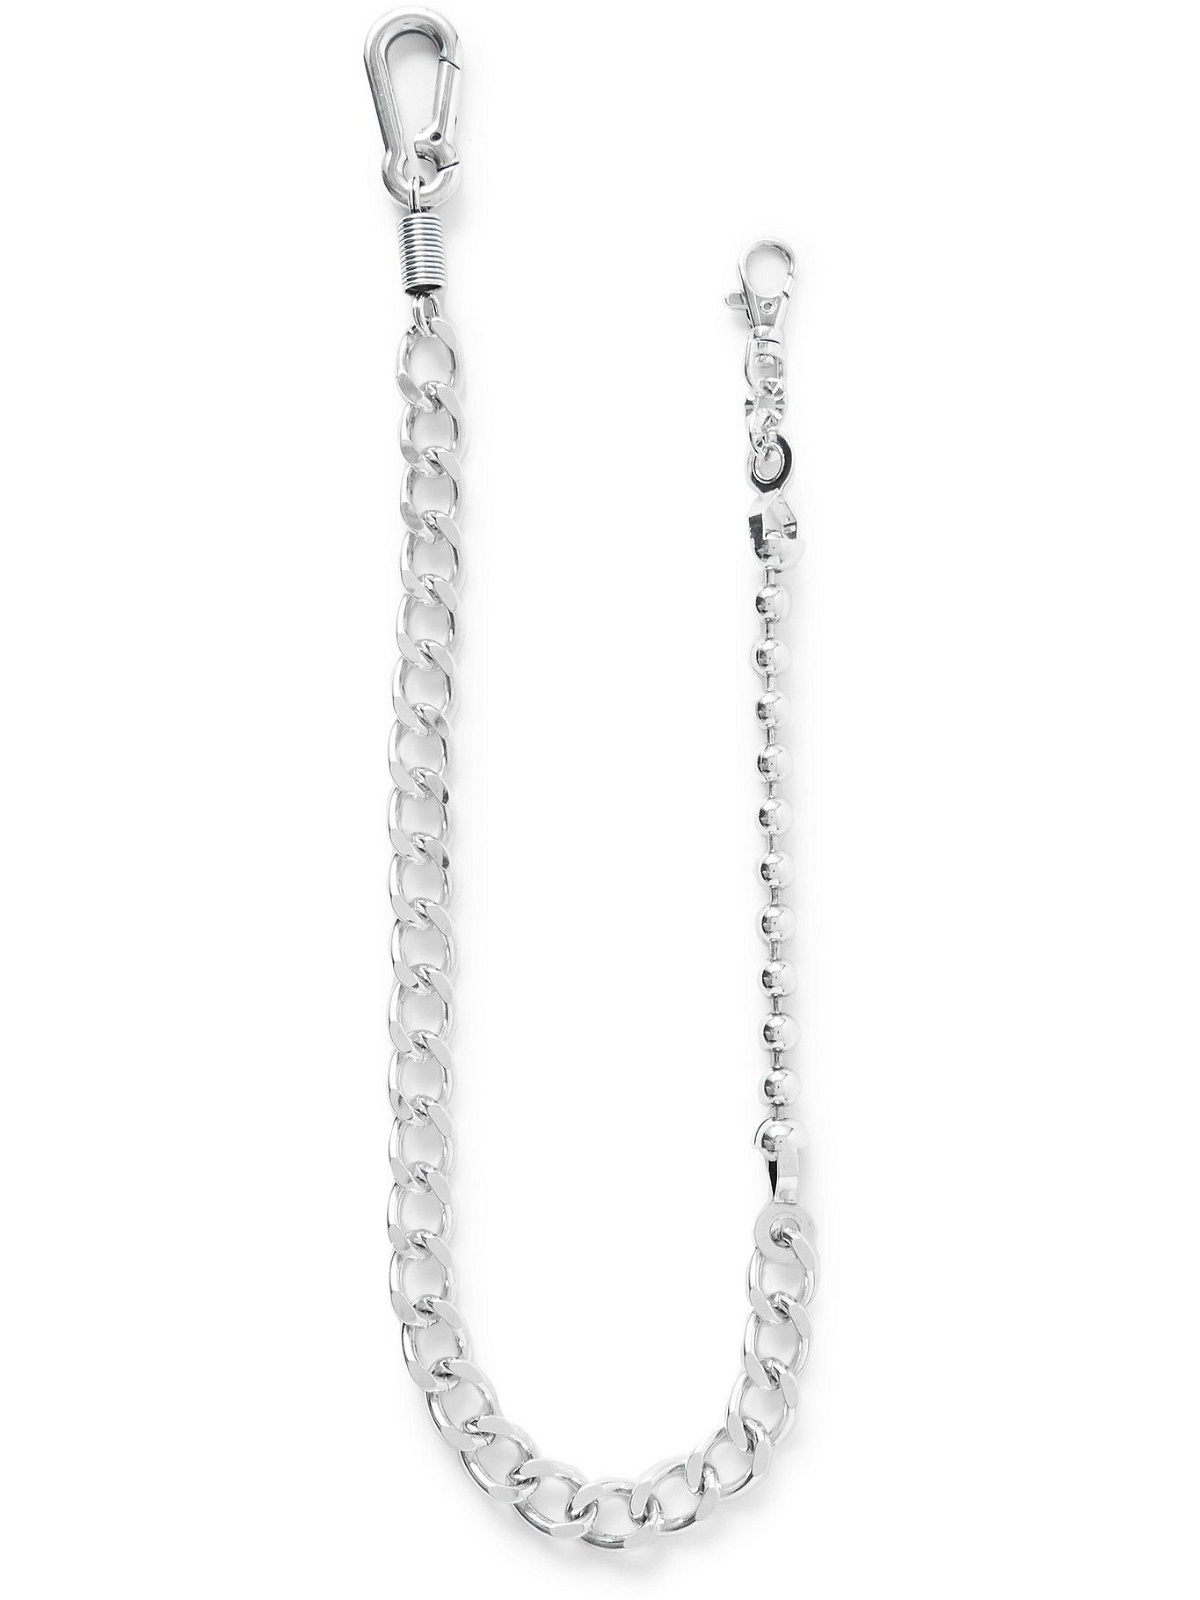 Photo: MARTINE ALI - Frankee Silver-Plated Wallet Chain